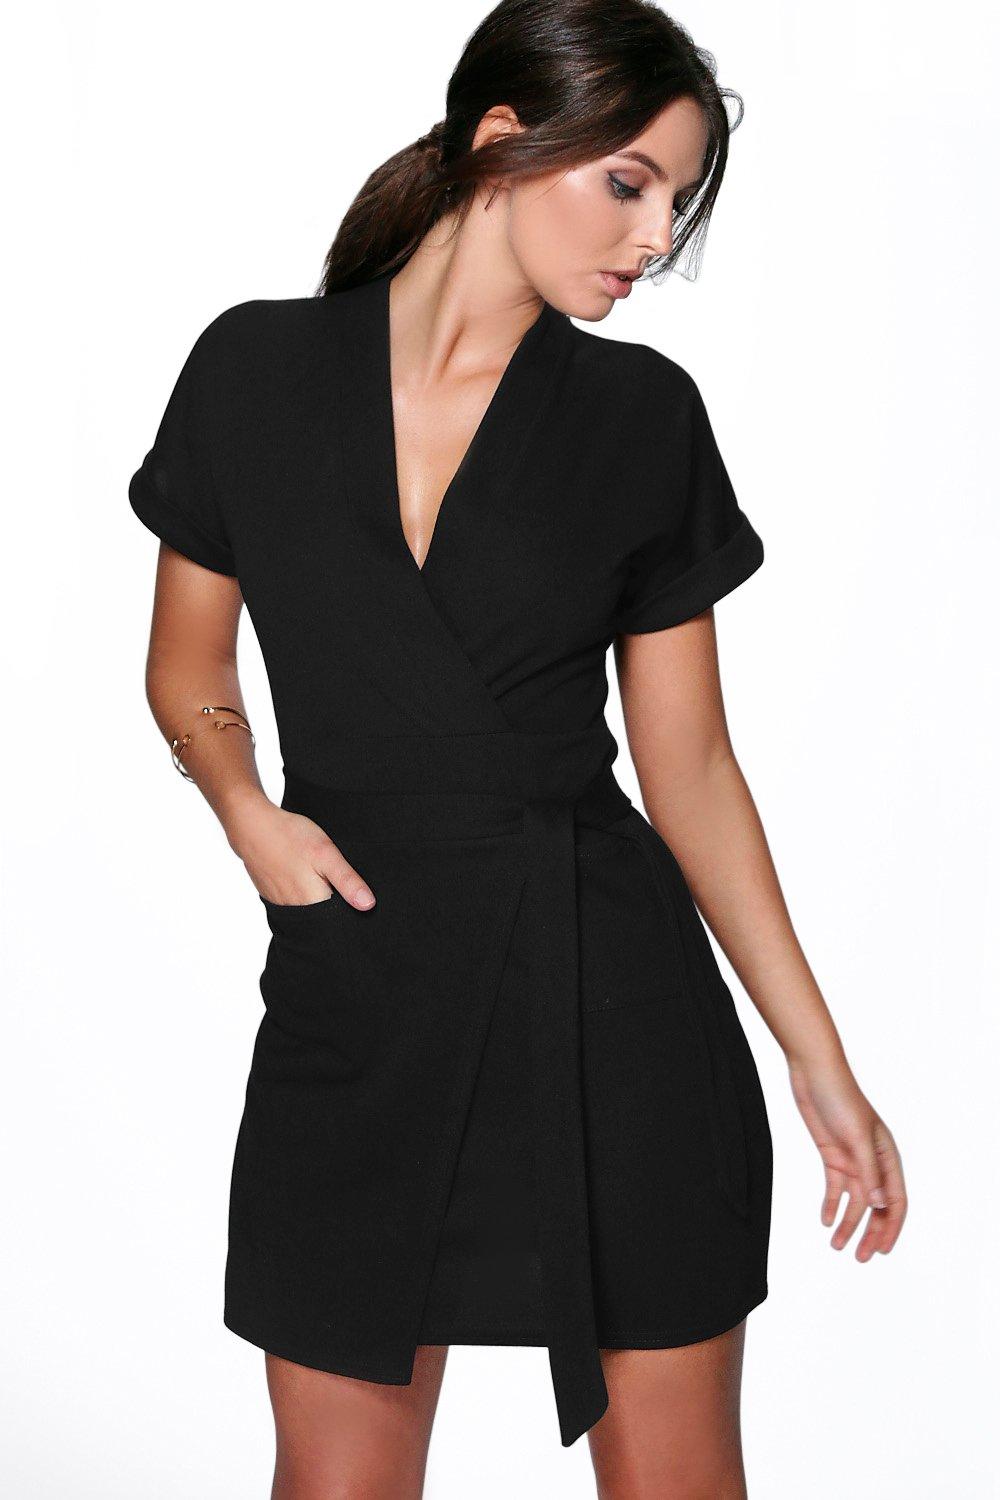 Get stylish accessories to look elegant with black wrap dress